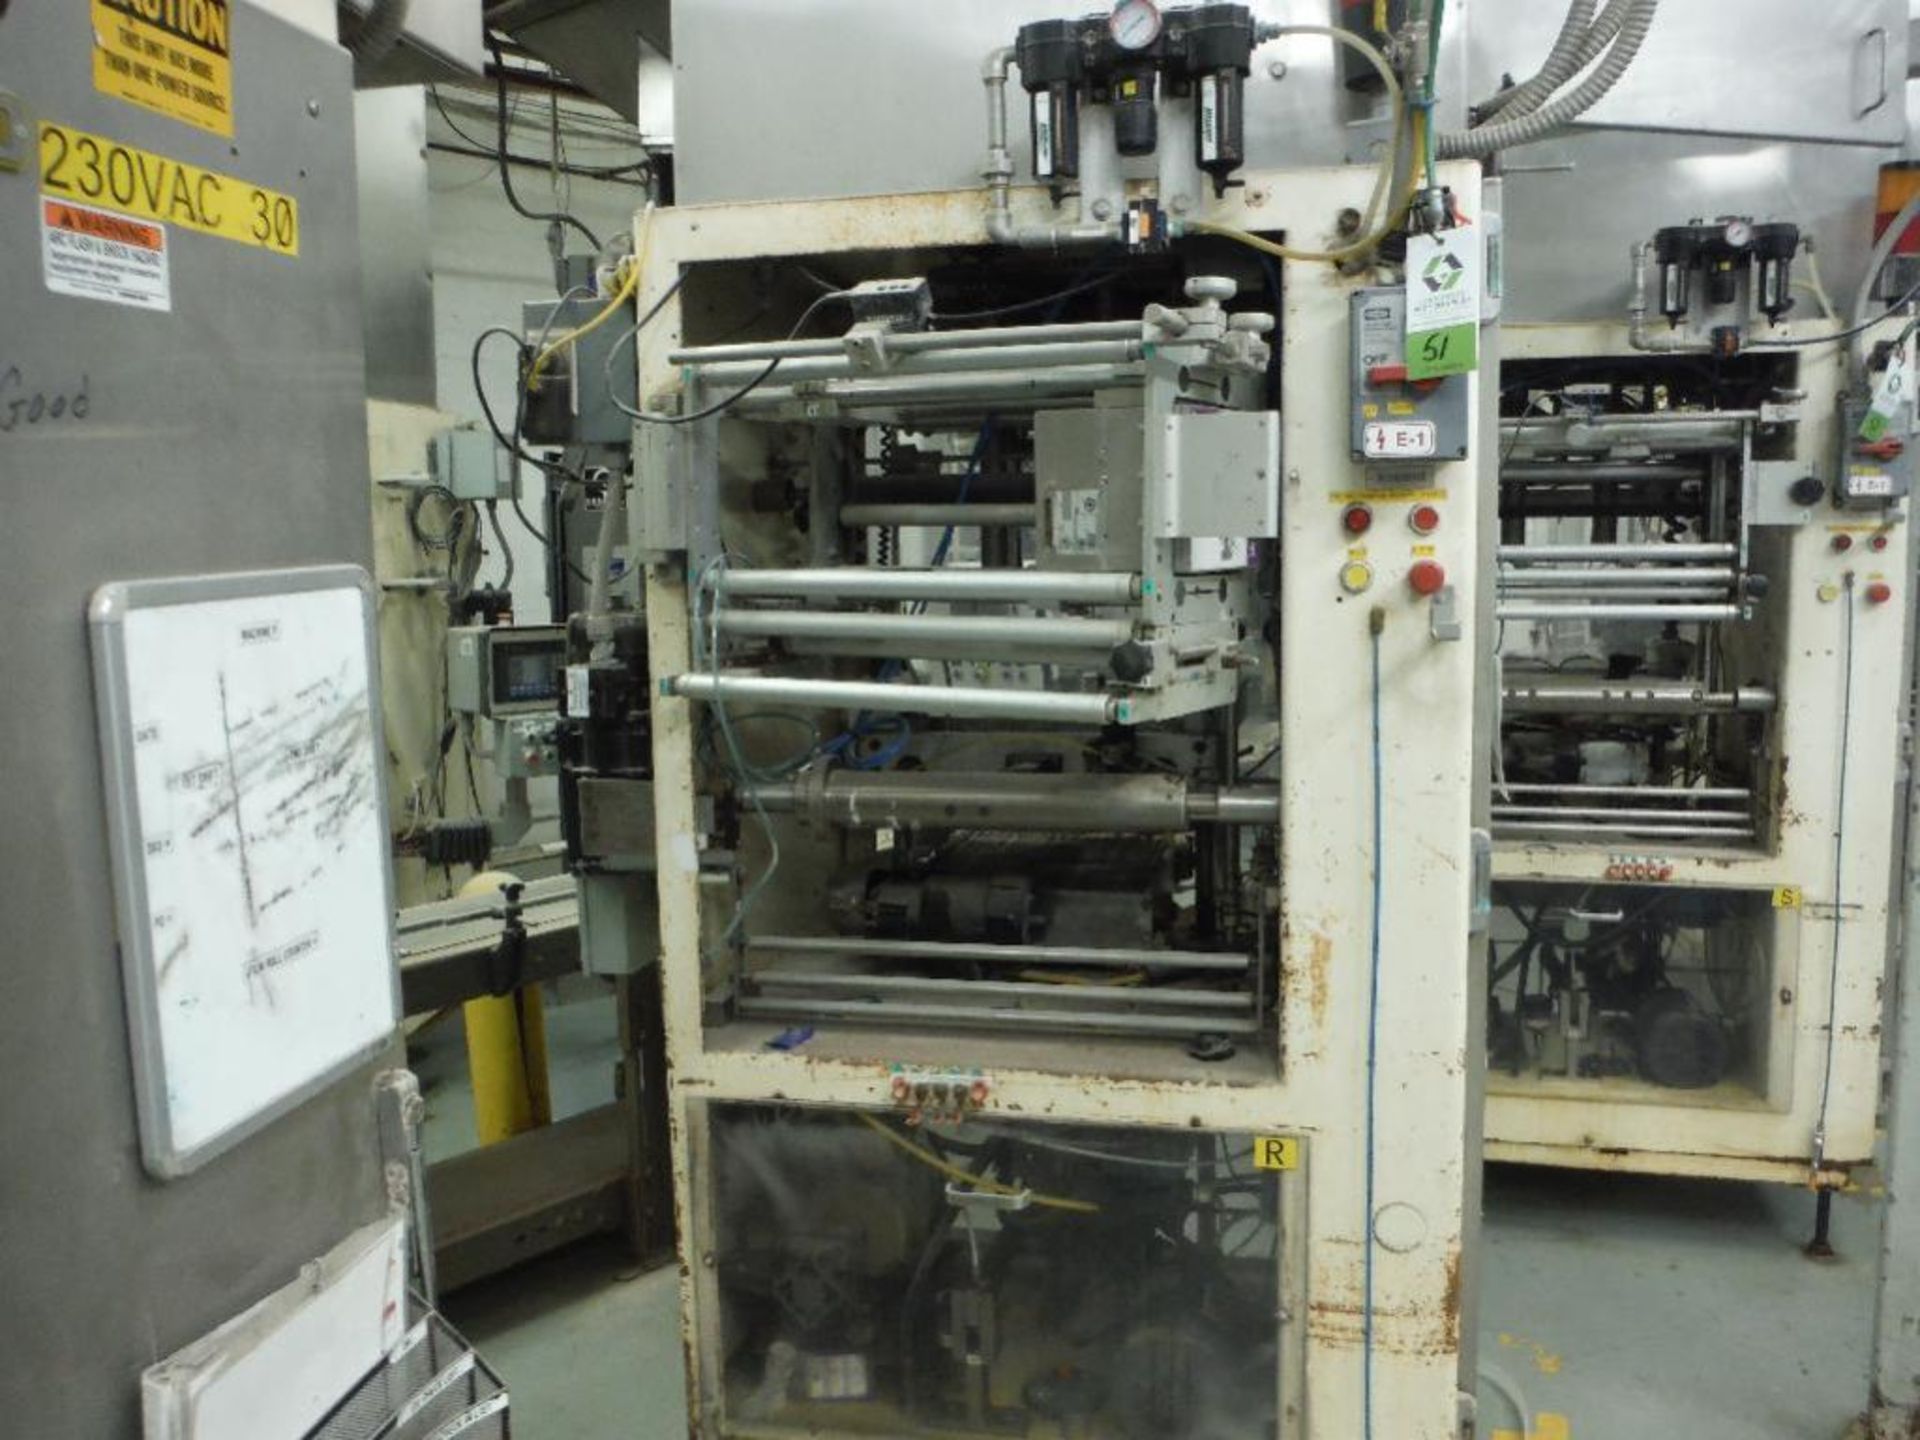 General Packaging Equipment vertical 2-up former/fill/seal/bagger, 15 in. jaw. w/ Smart Date X40. No